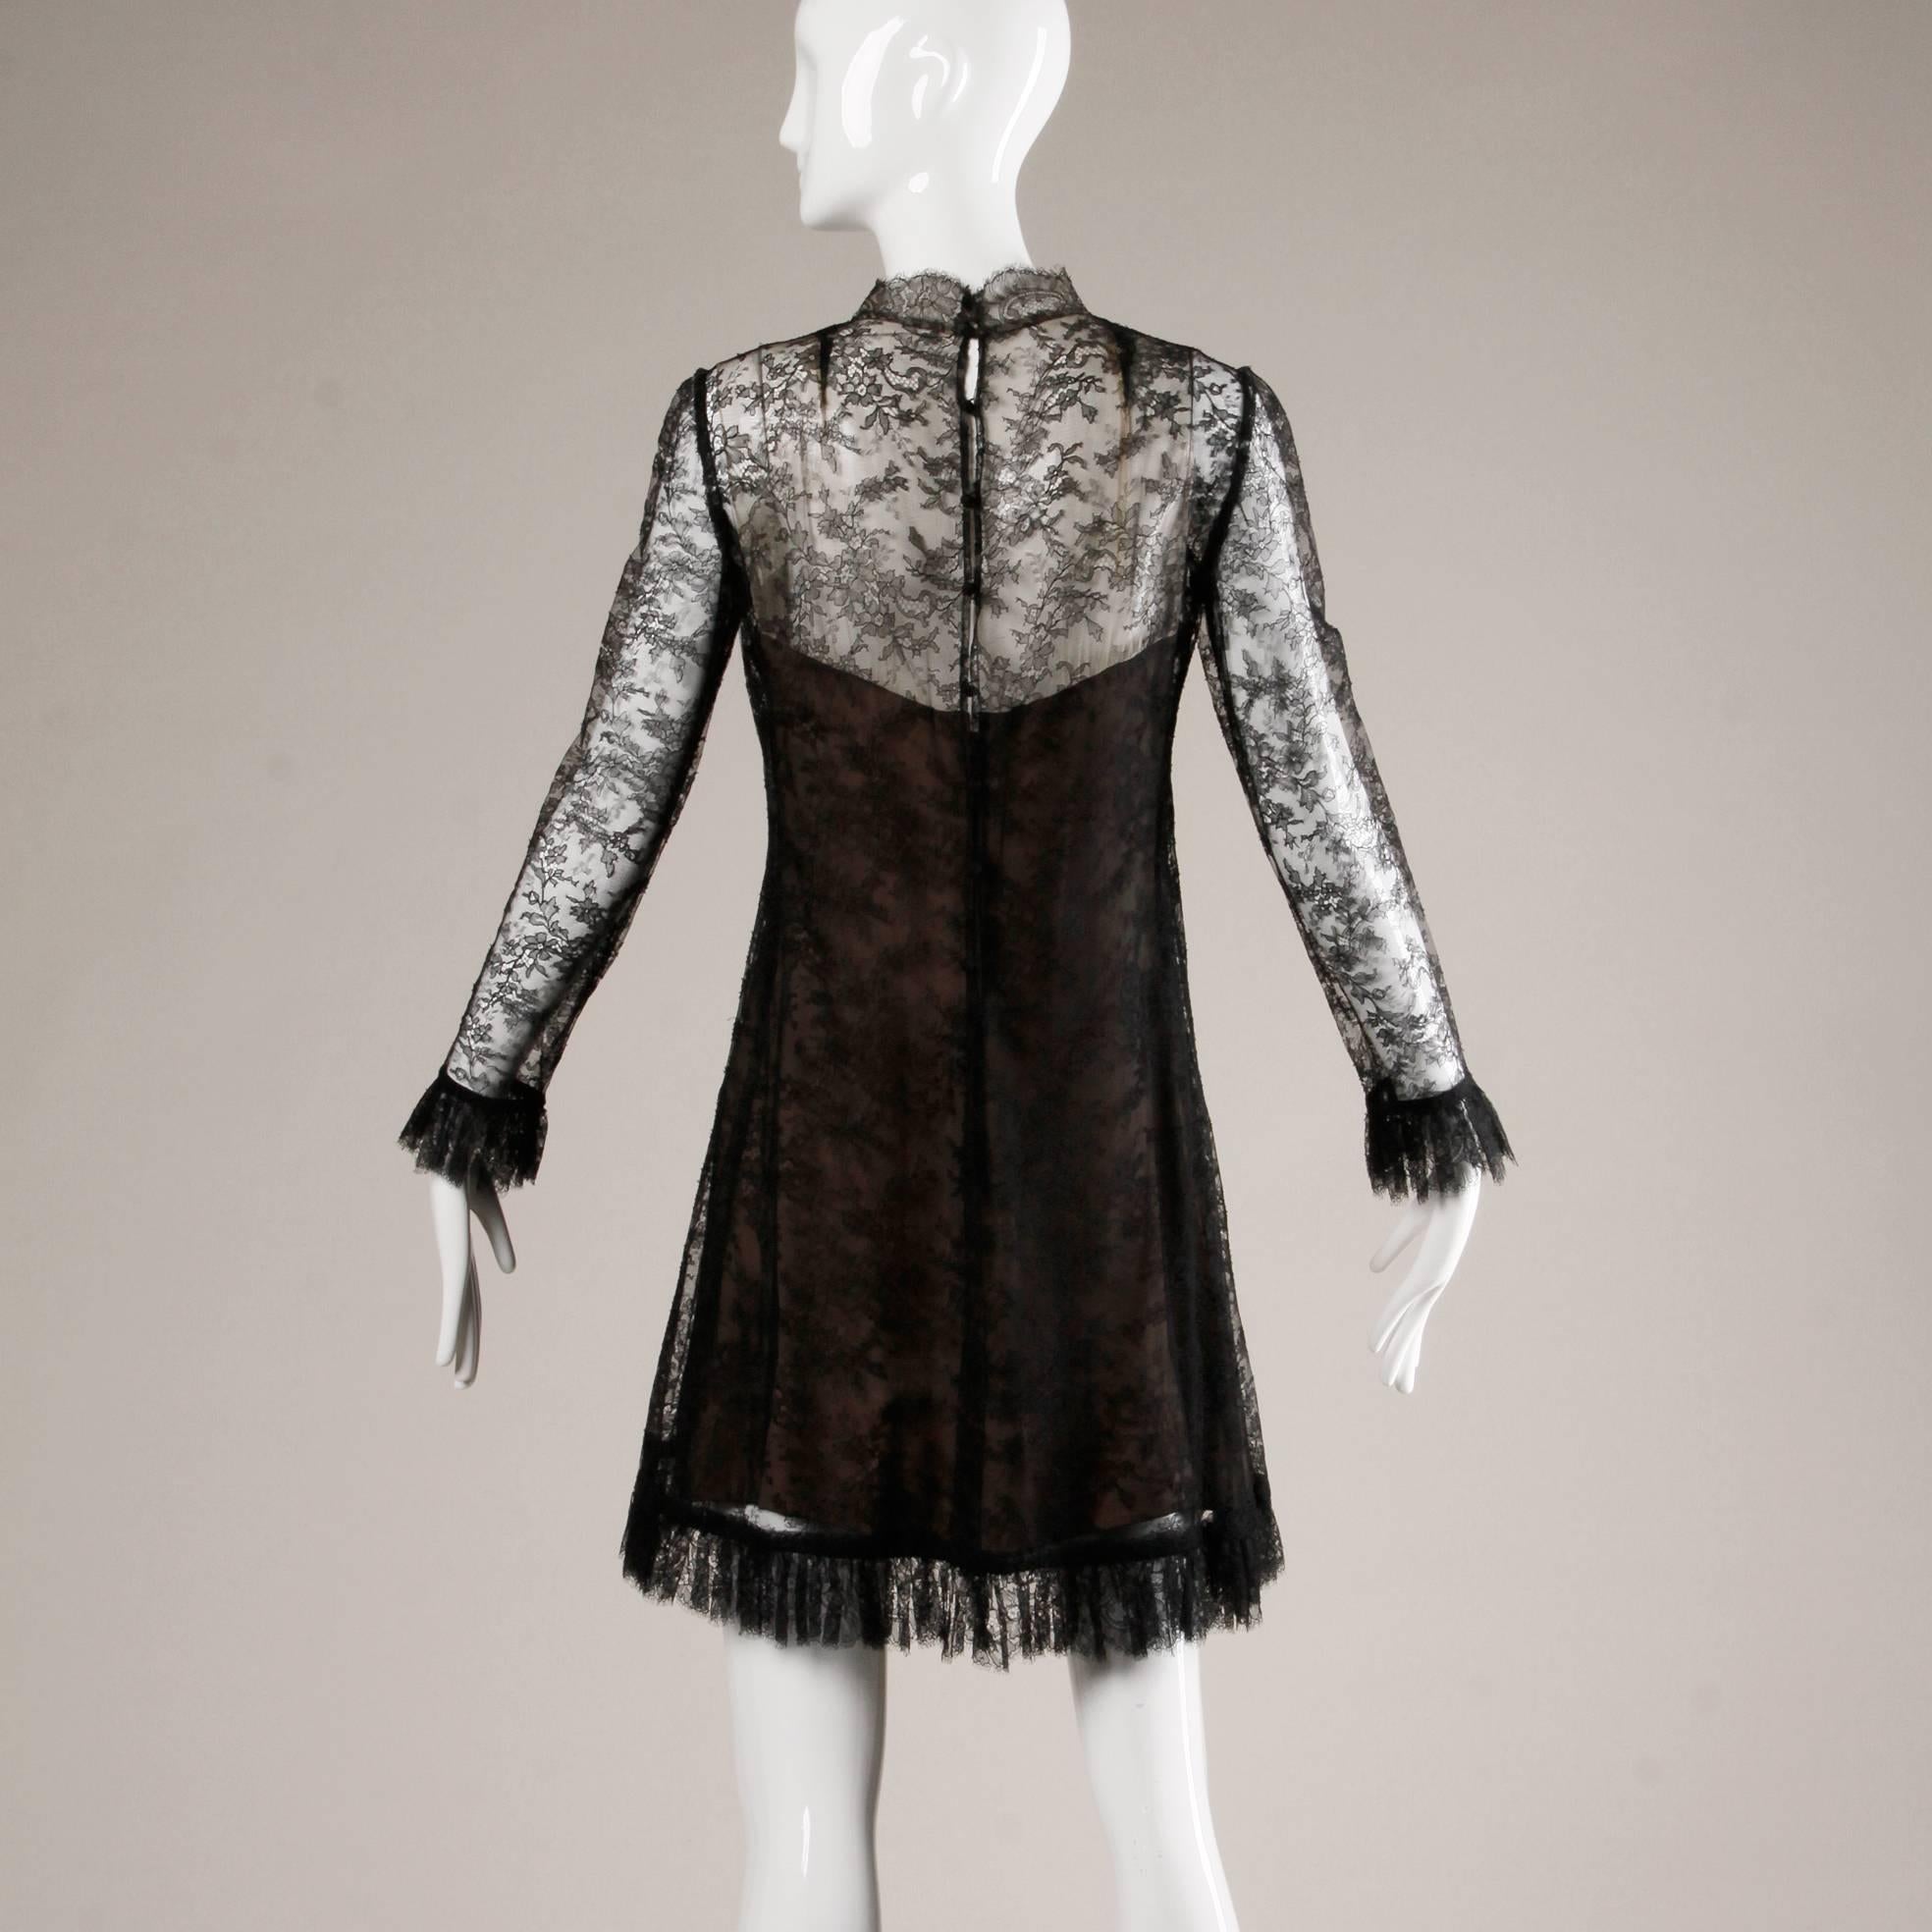 Women's 1960s Vintage Brown + Black Nude Illusion Chantilly Lace Cocktail Dress